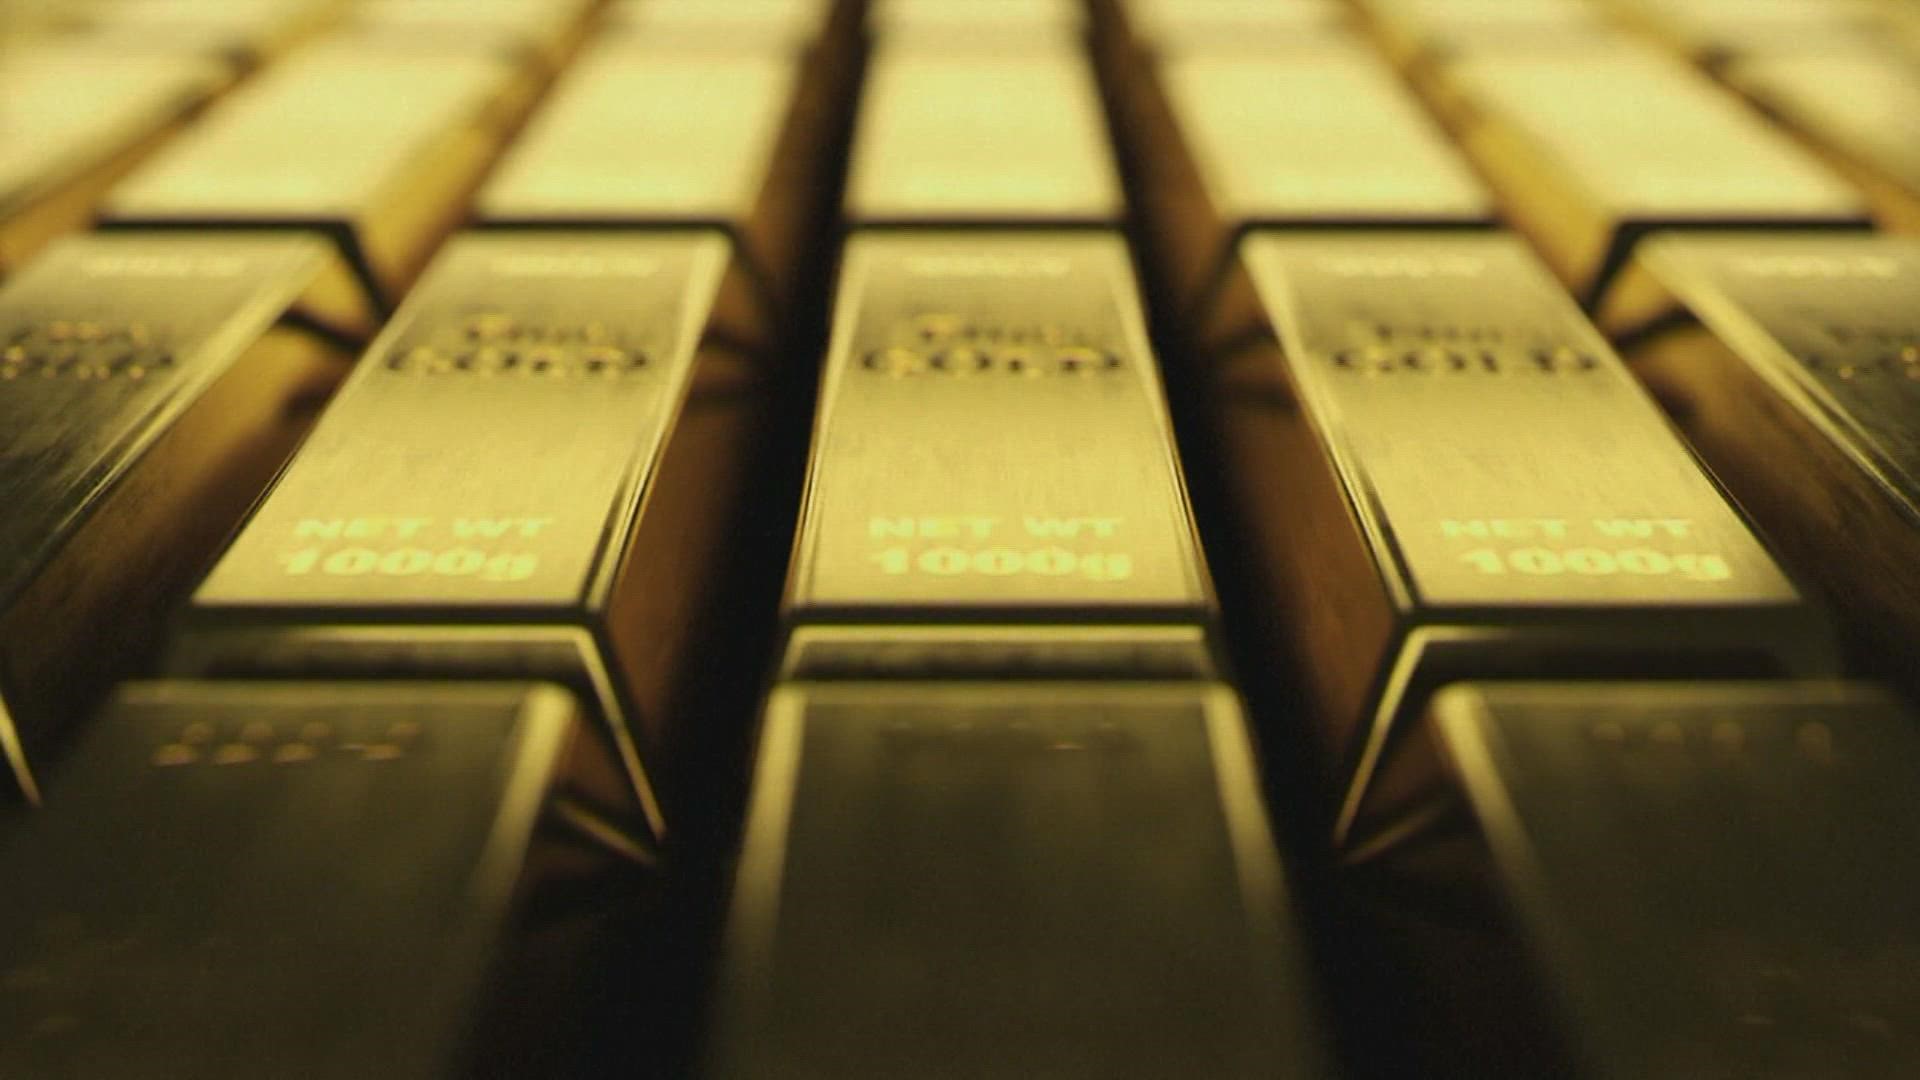 Some analysts believe as inflation slows, more money may go into gold and push it above $2,000 an ounce in 2023.